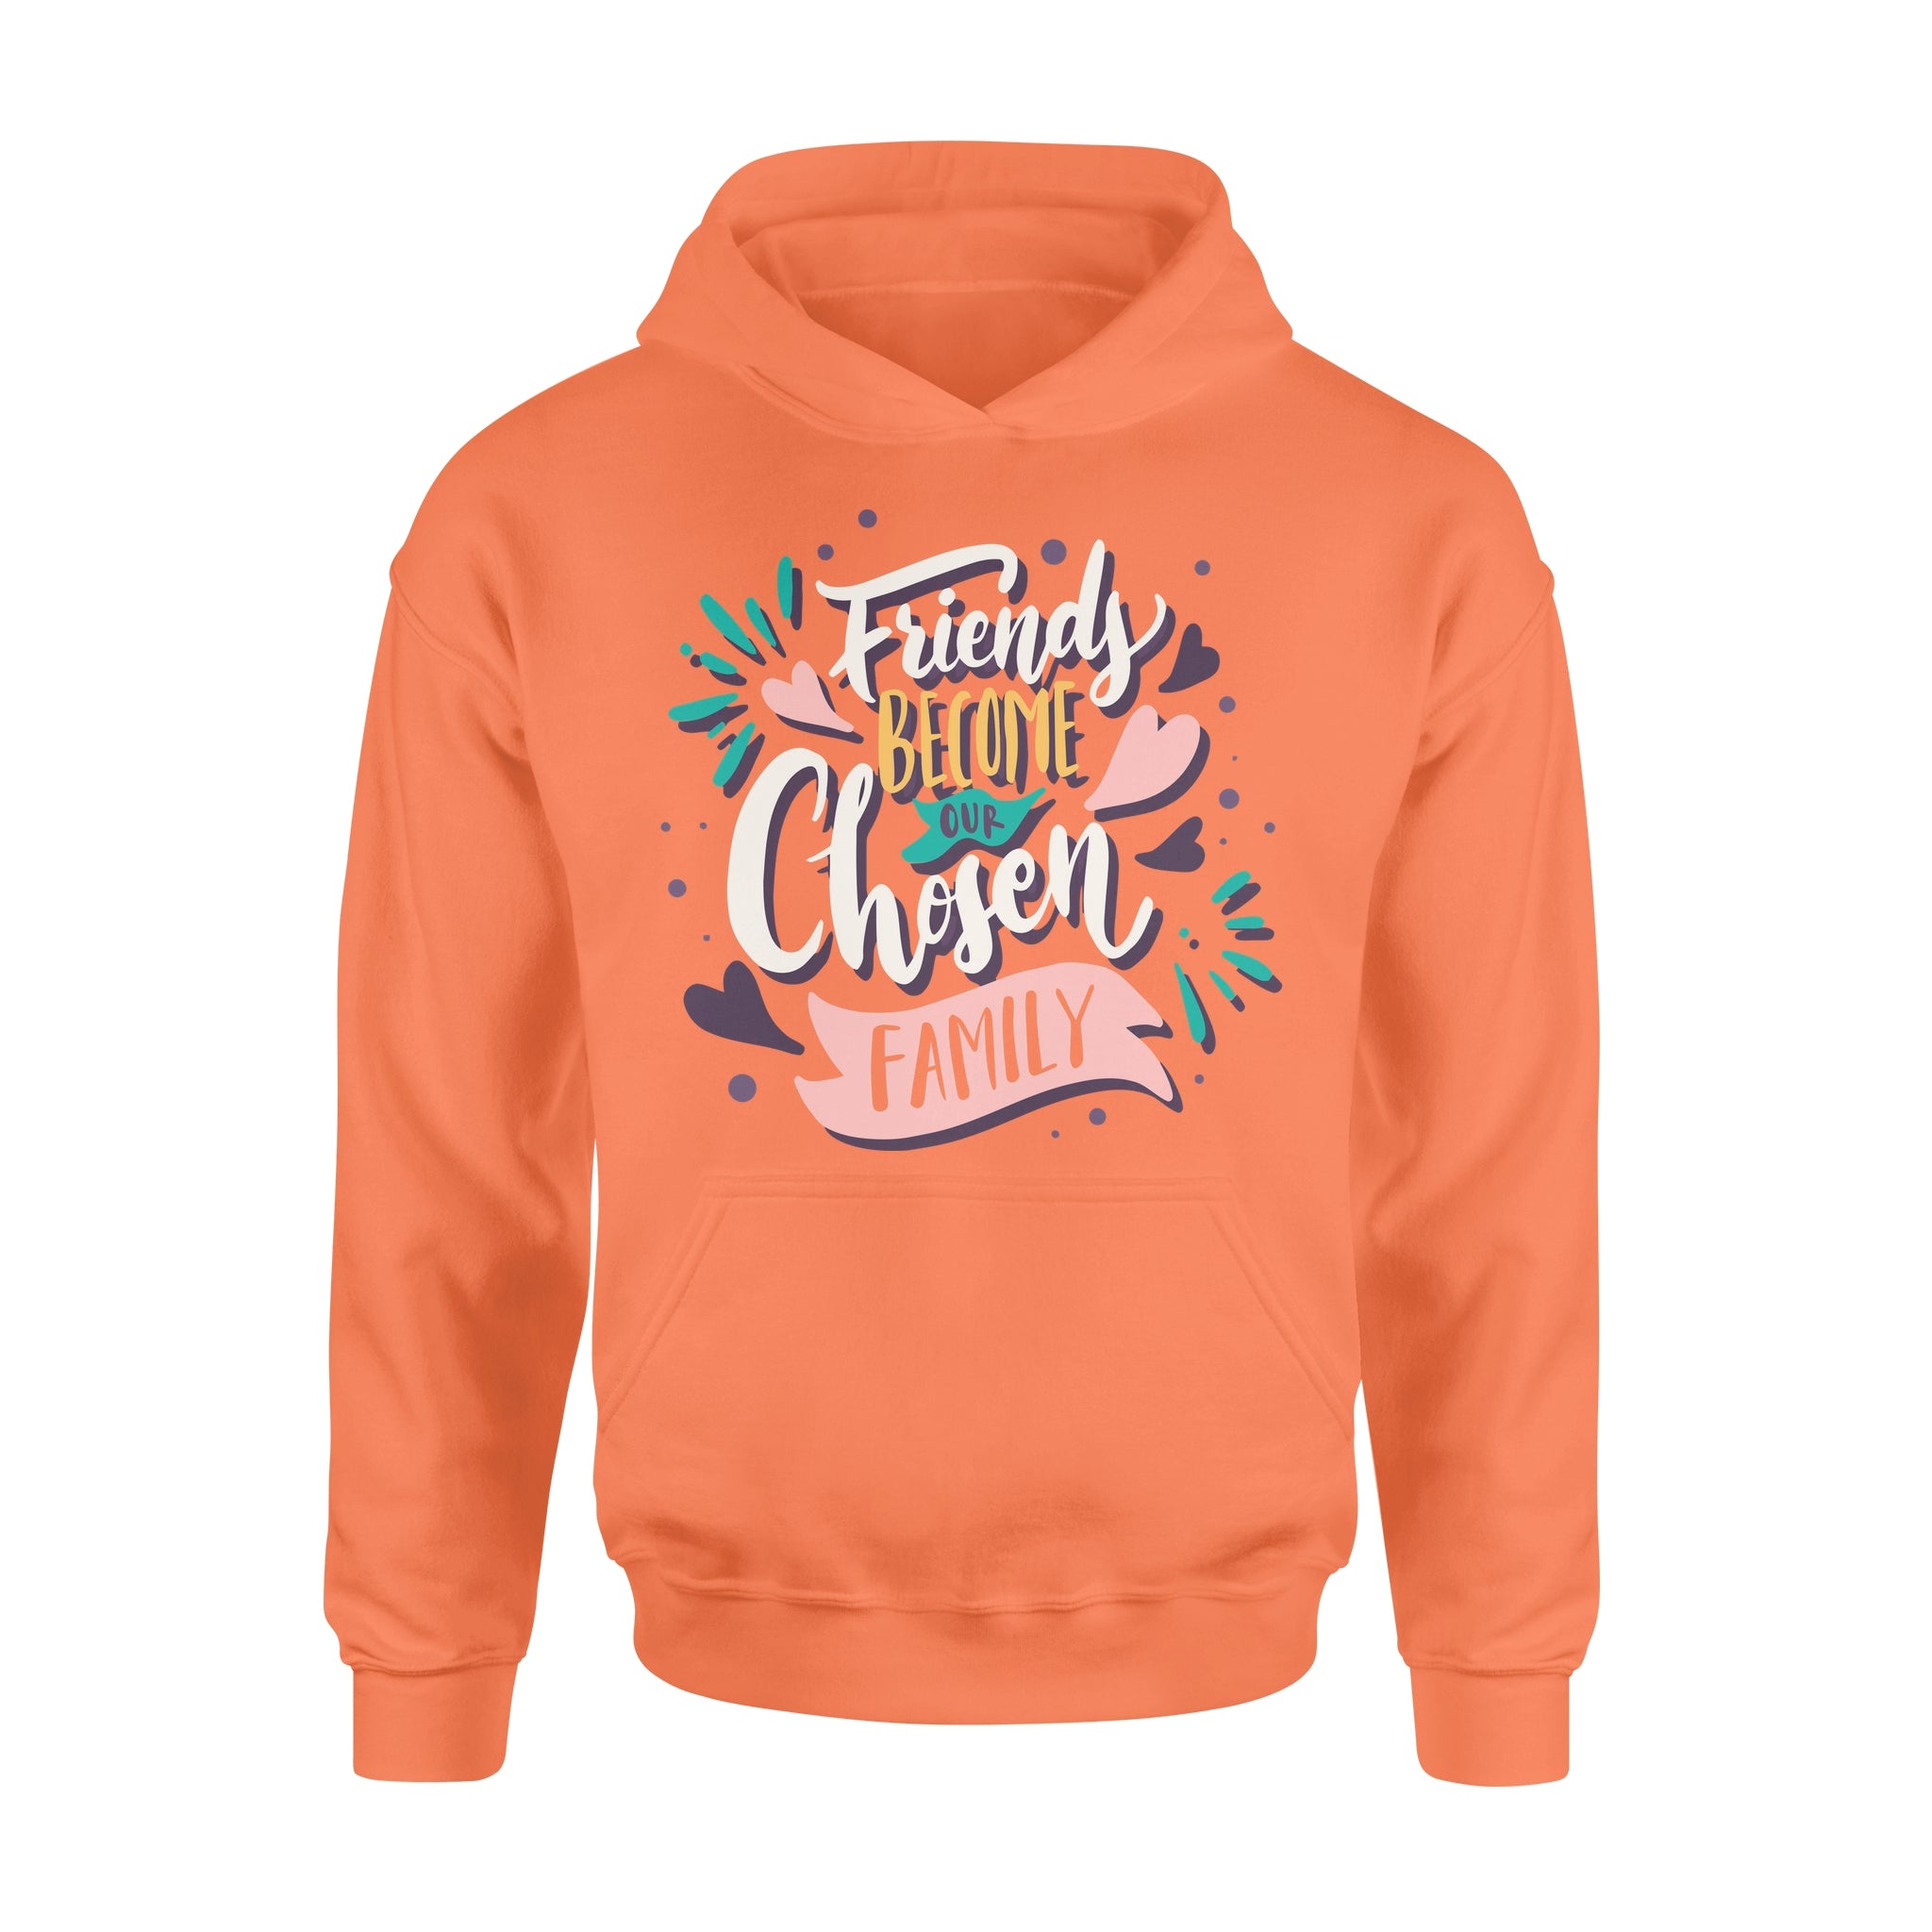 Friend Become Our Chosen Family - Hoodie